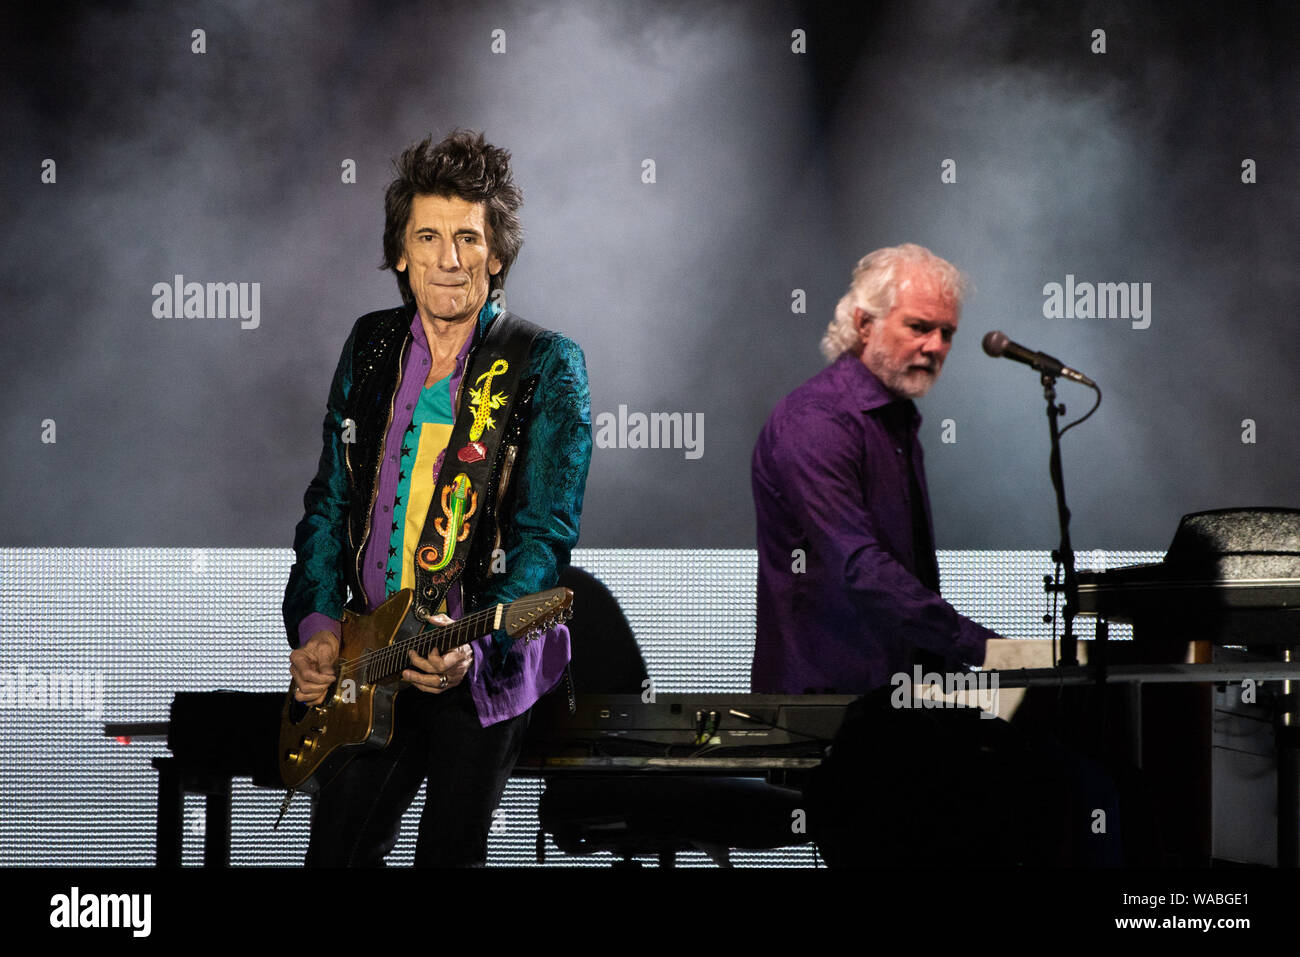 SANTA CLARA, CALIFORNIA - AUGUST 18: Ronnie Wood and Chuck Leavell of The  Rolling Stones perform at Levi's Stadium on August 18, 2019 in Santa Clara,  California. Photo: Chris Tuite/imageSPACE/MediaPunch Stock Photo - Alamy